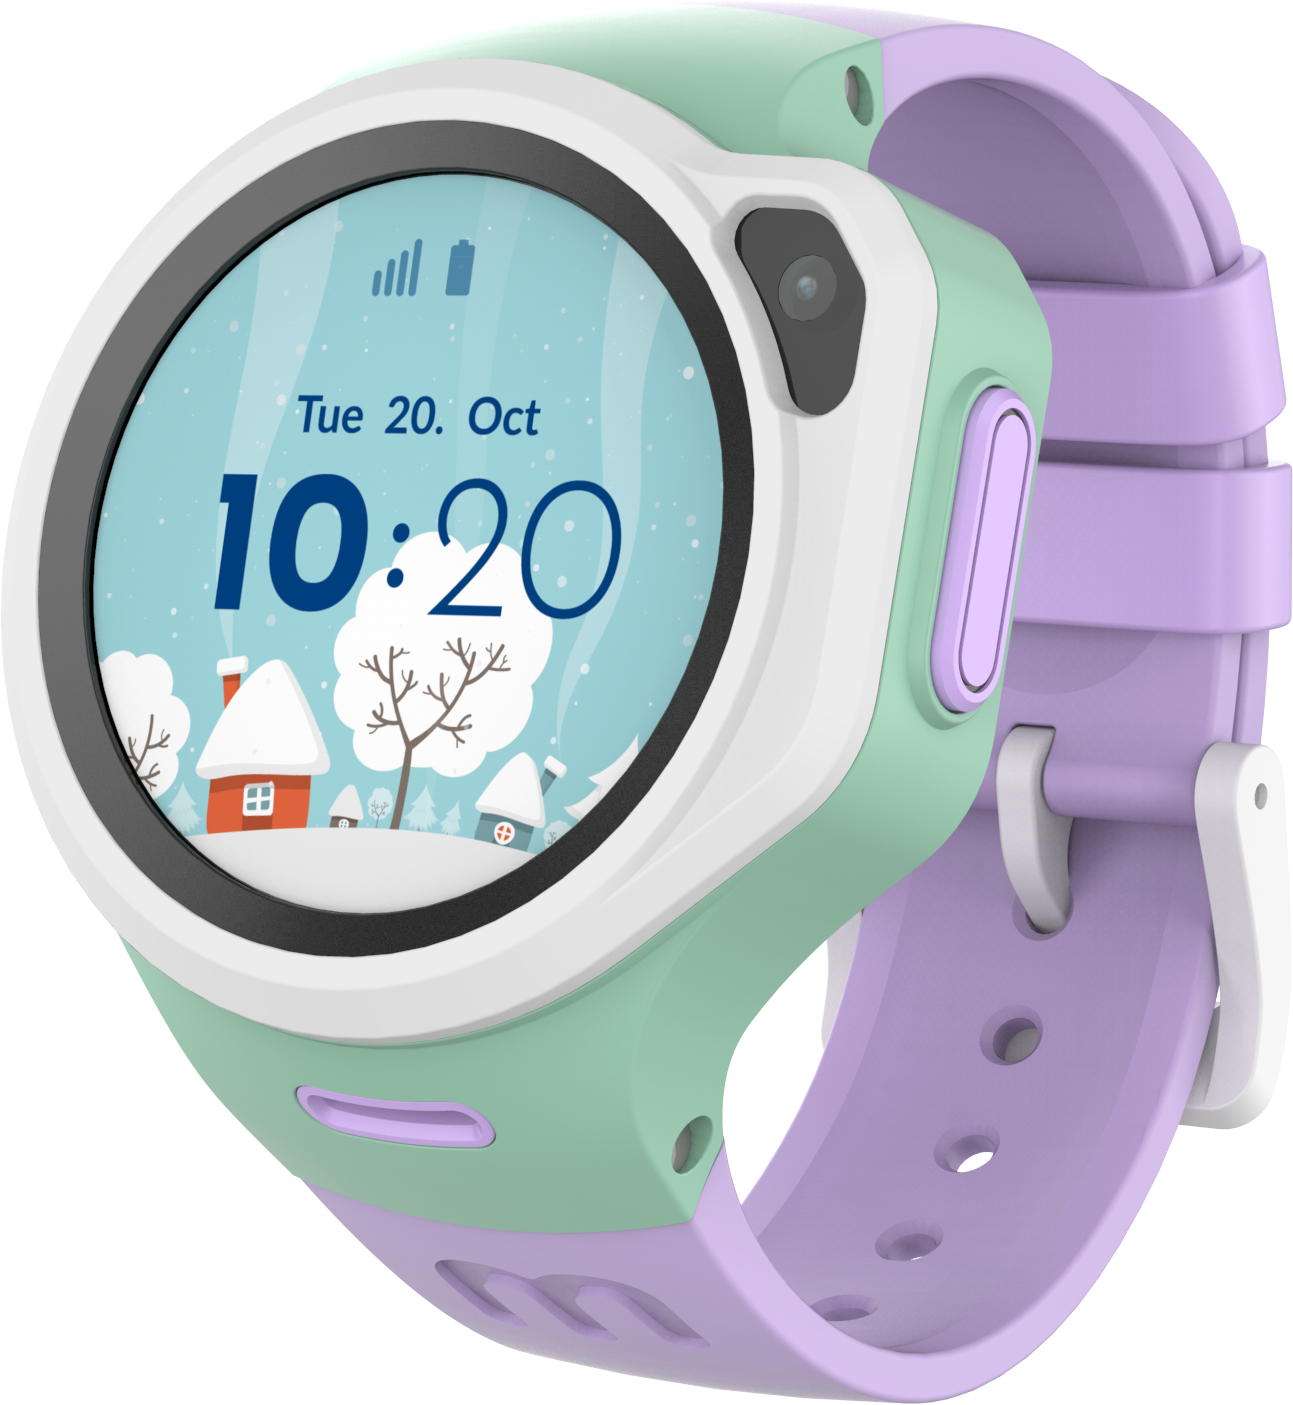 myFirst Fone R1 - Smart watch phone for kids with gps tracker